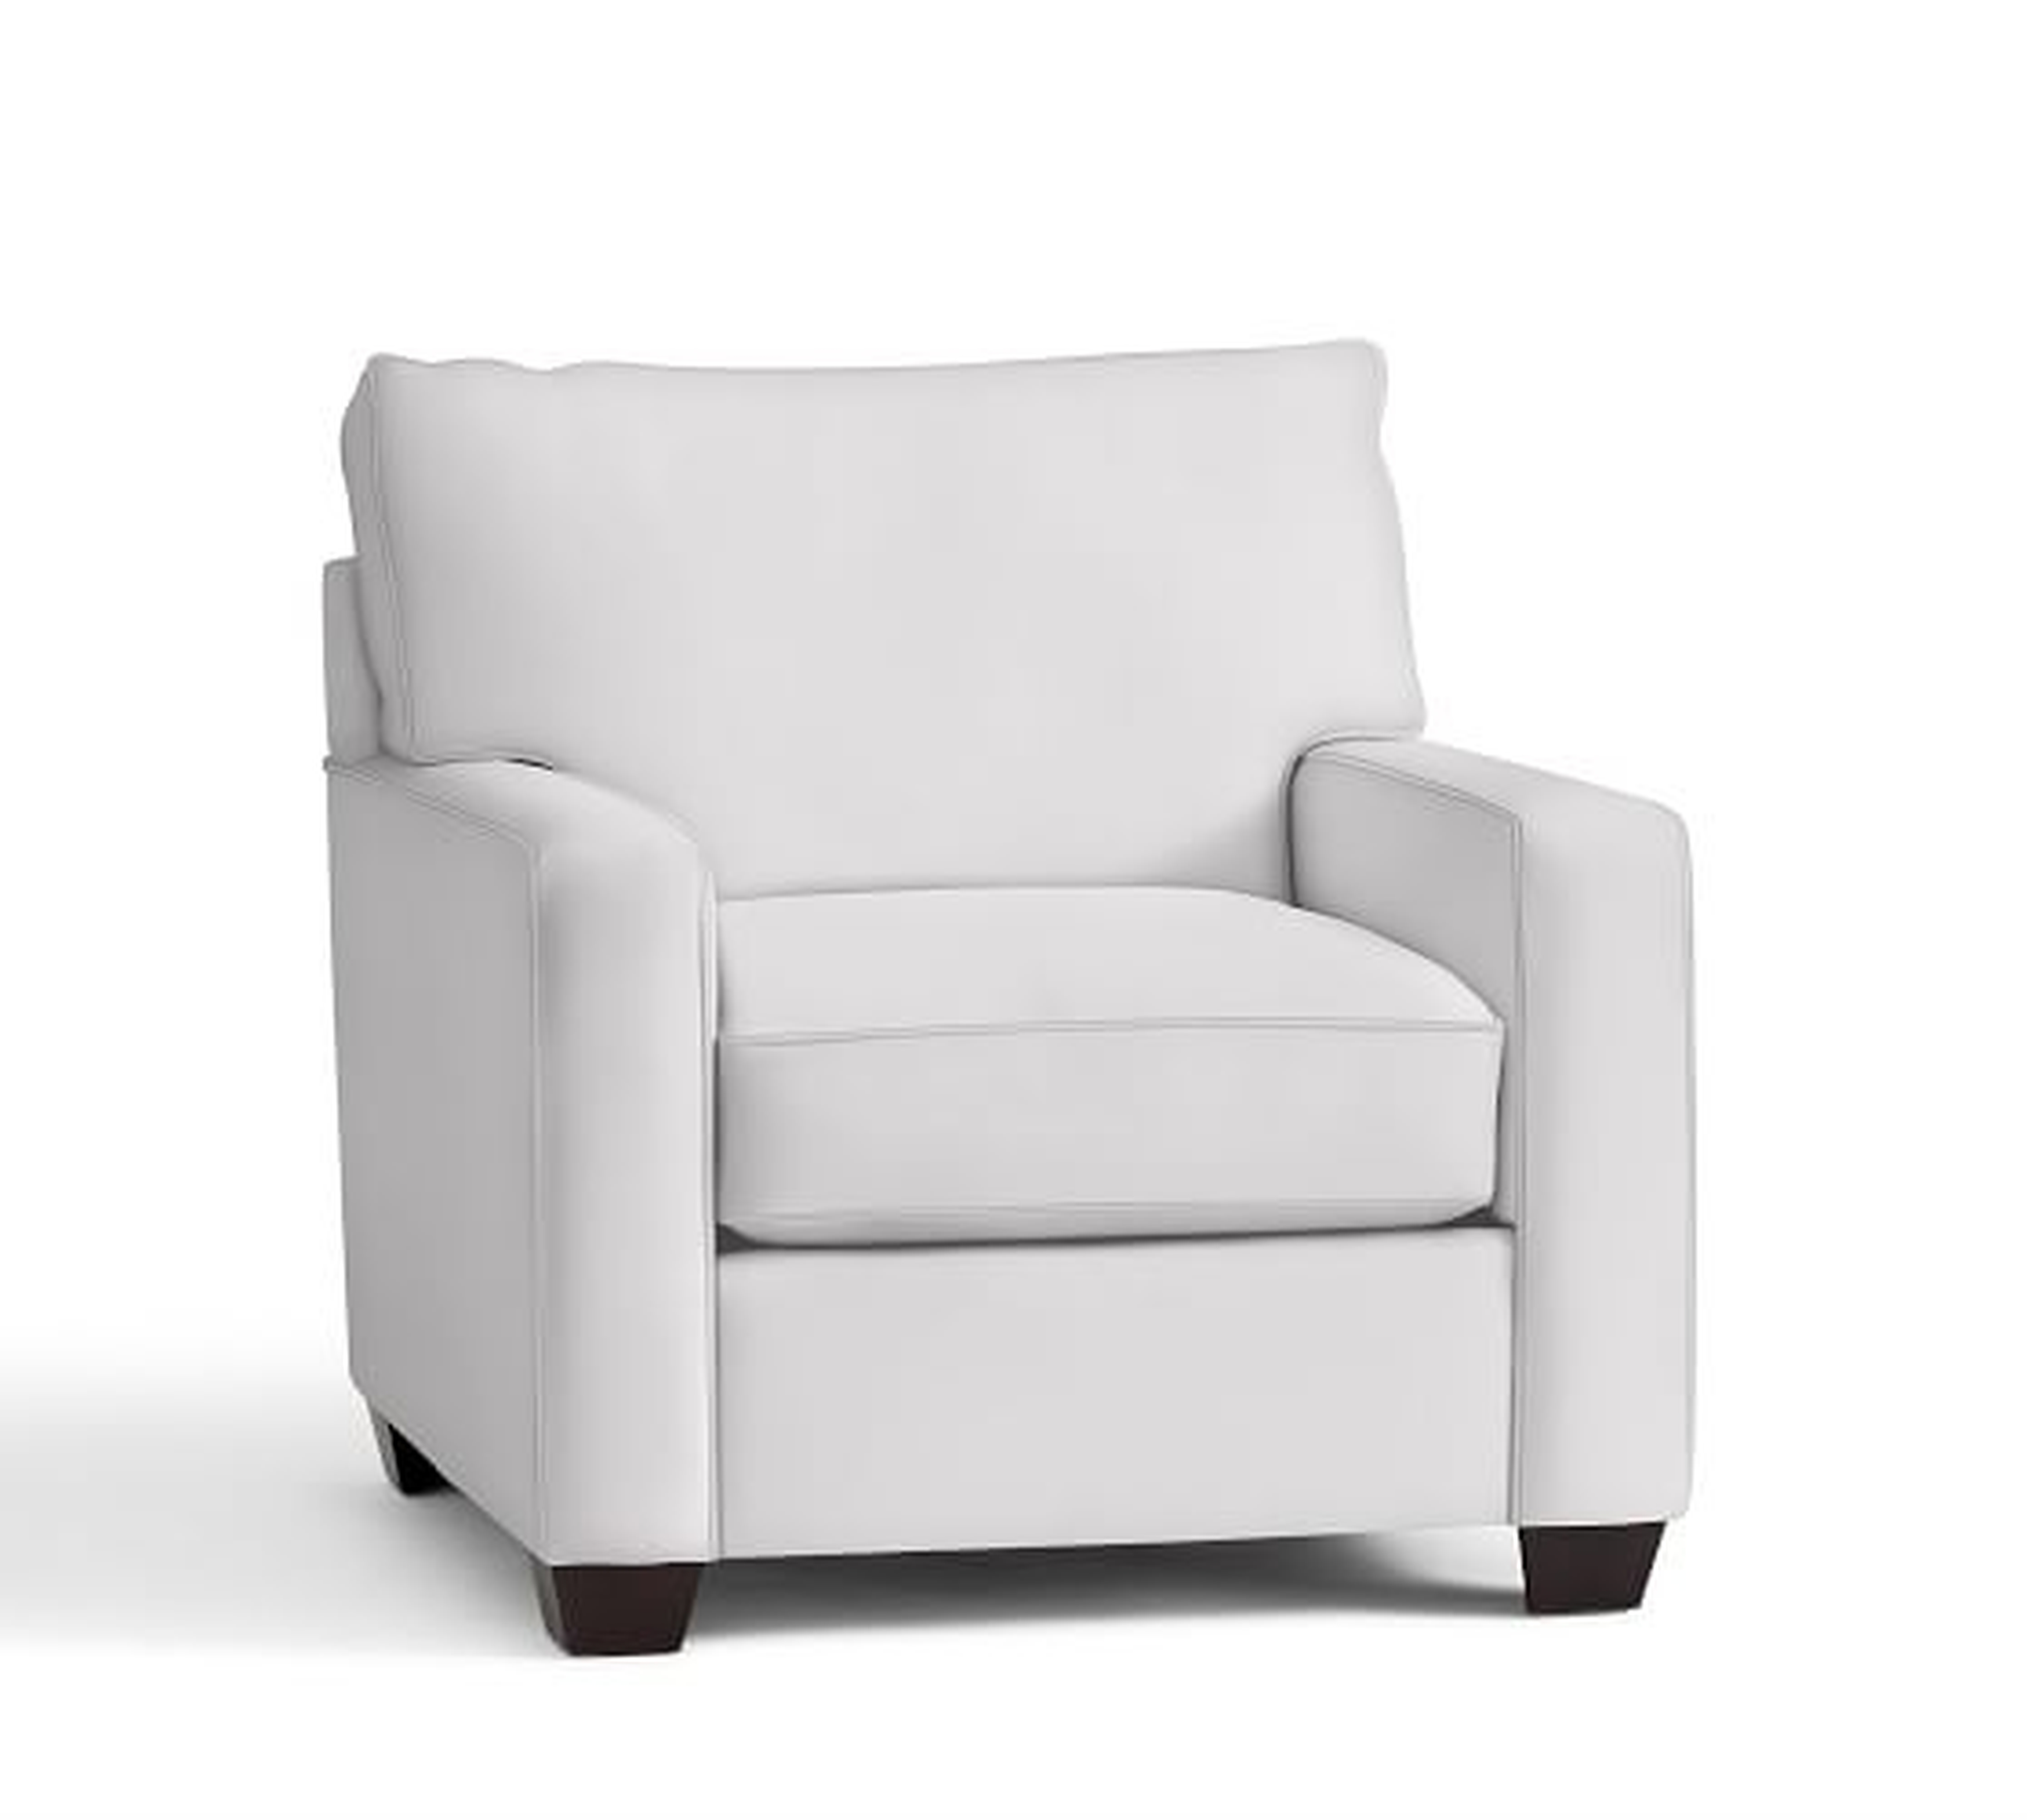 BUCHANAN SQUARE ARM UPHOLSTERED ARMCHAIR, Twill, White - Pottery Barn